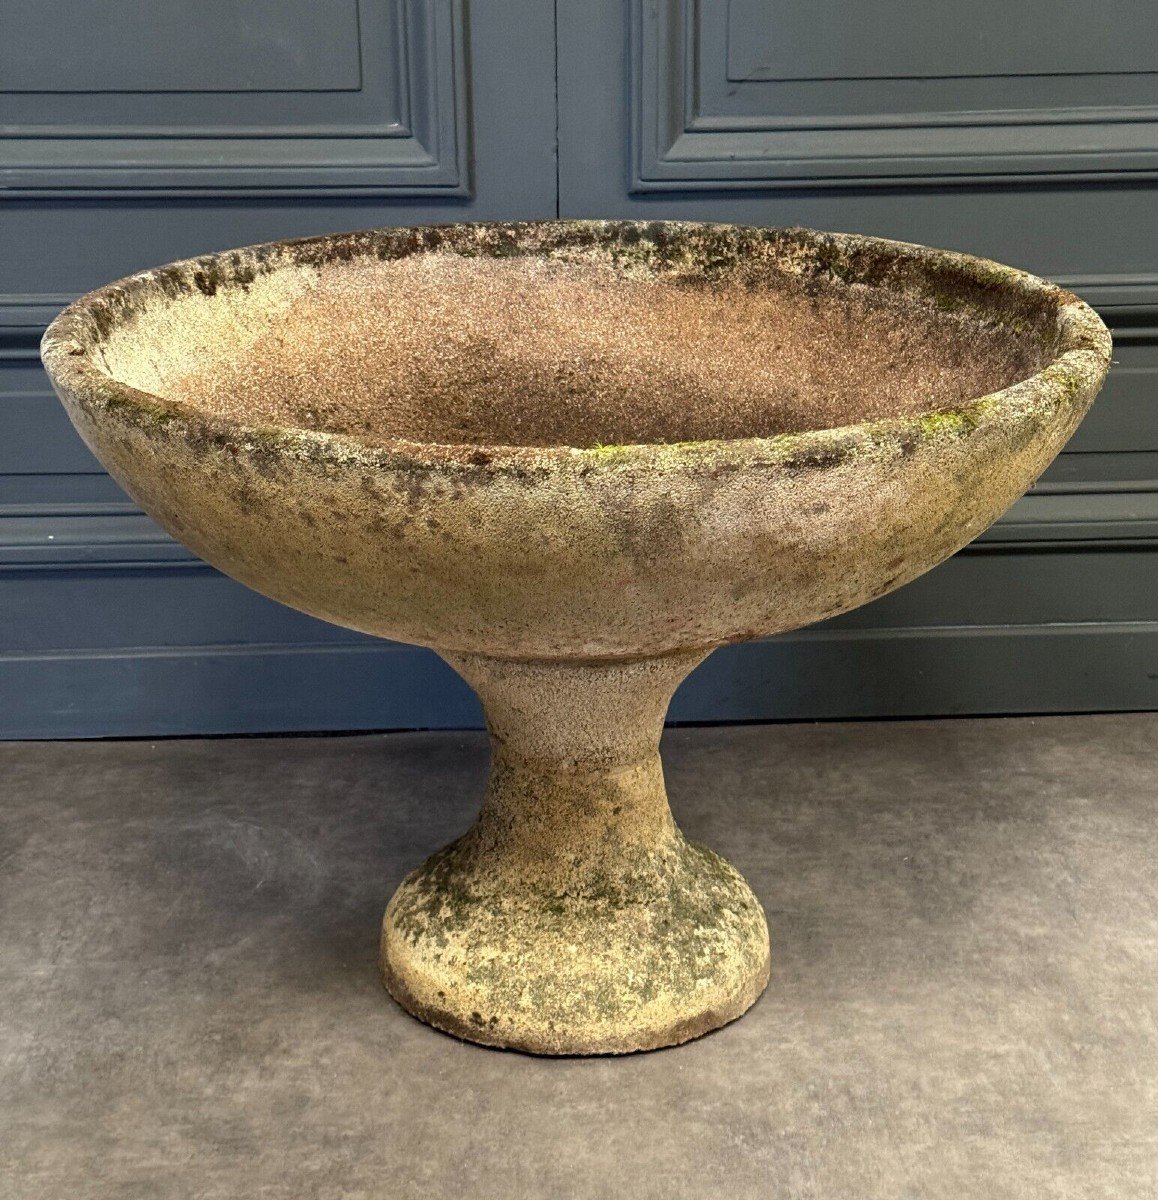 Diabolo Cement Planter By Willy Guhl 20th Century